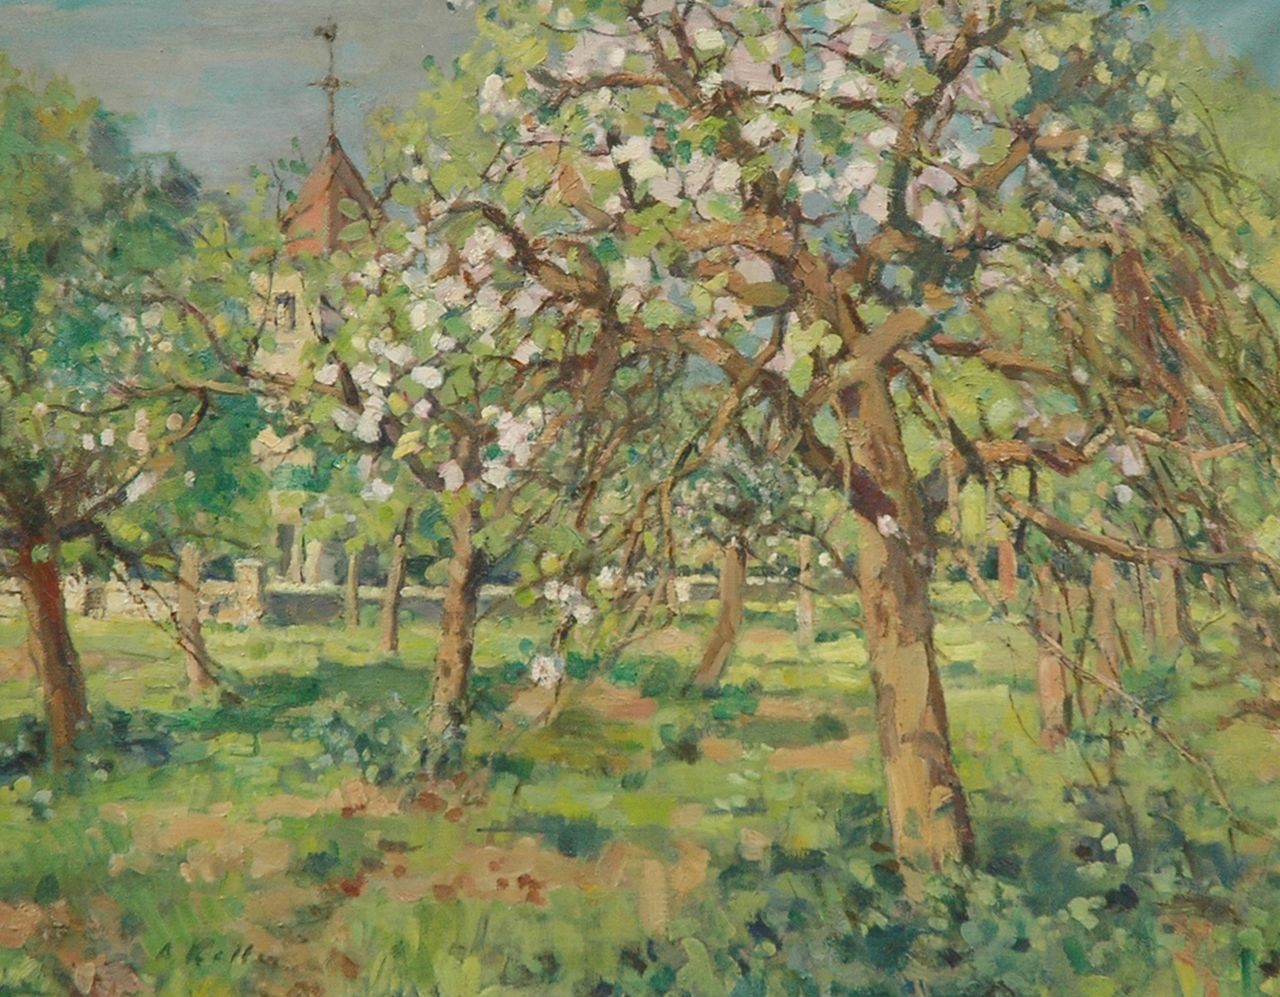 Keller A.  | Adolphe Keller, Orchard in bloom, oil on canvas 73.4 x 92.3 cm, signed l.l. and dated 1954 on the stretcher